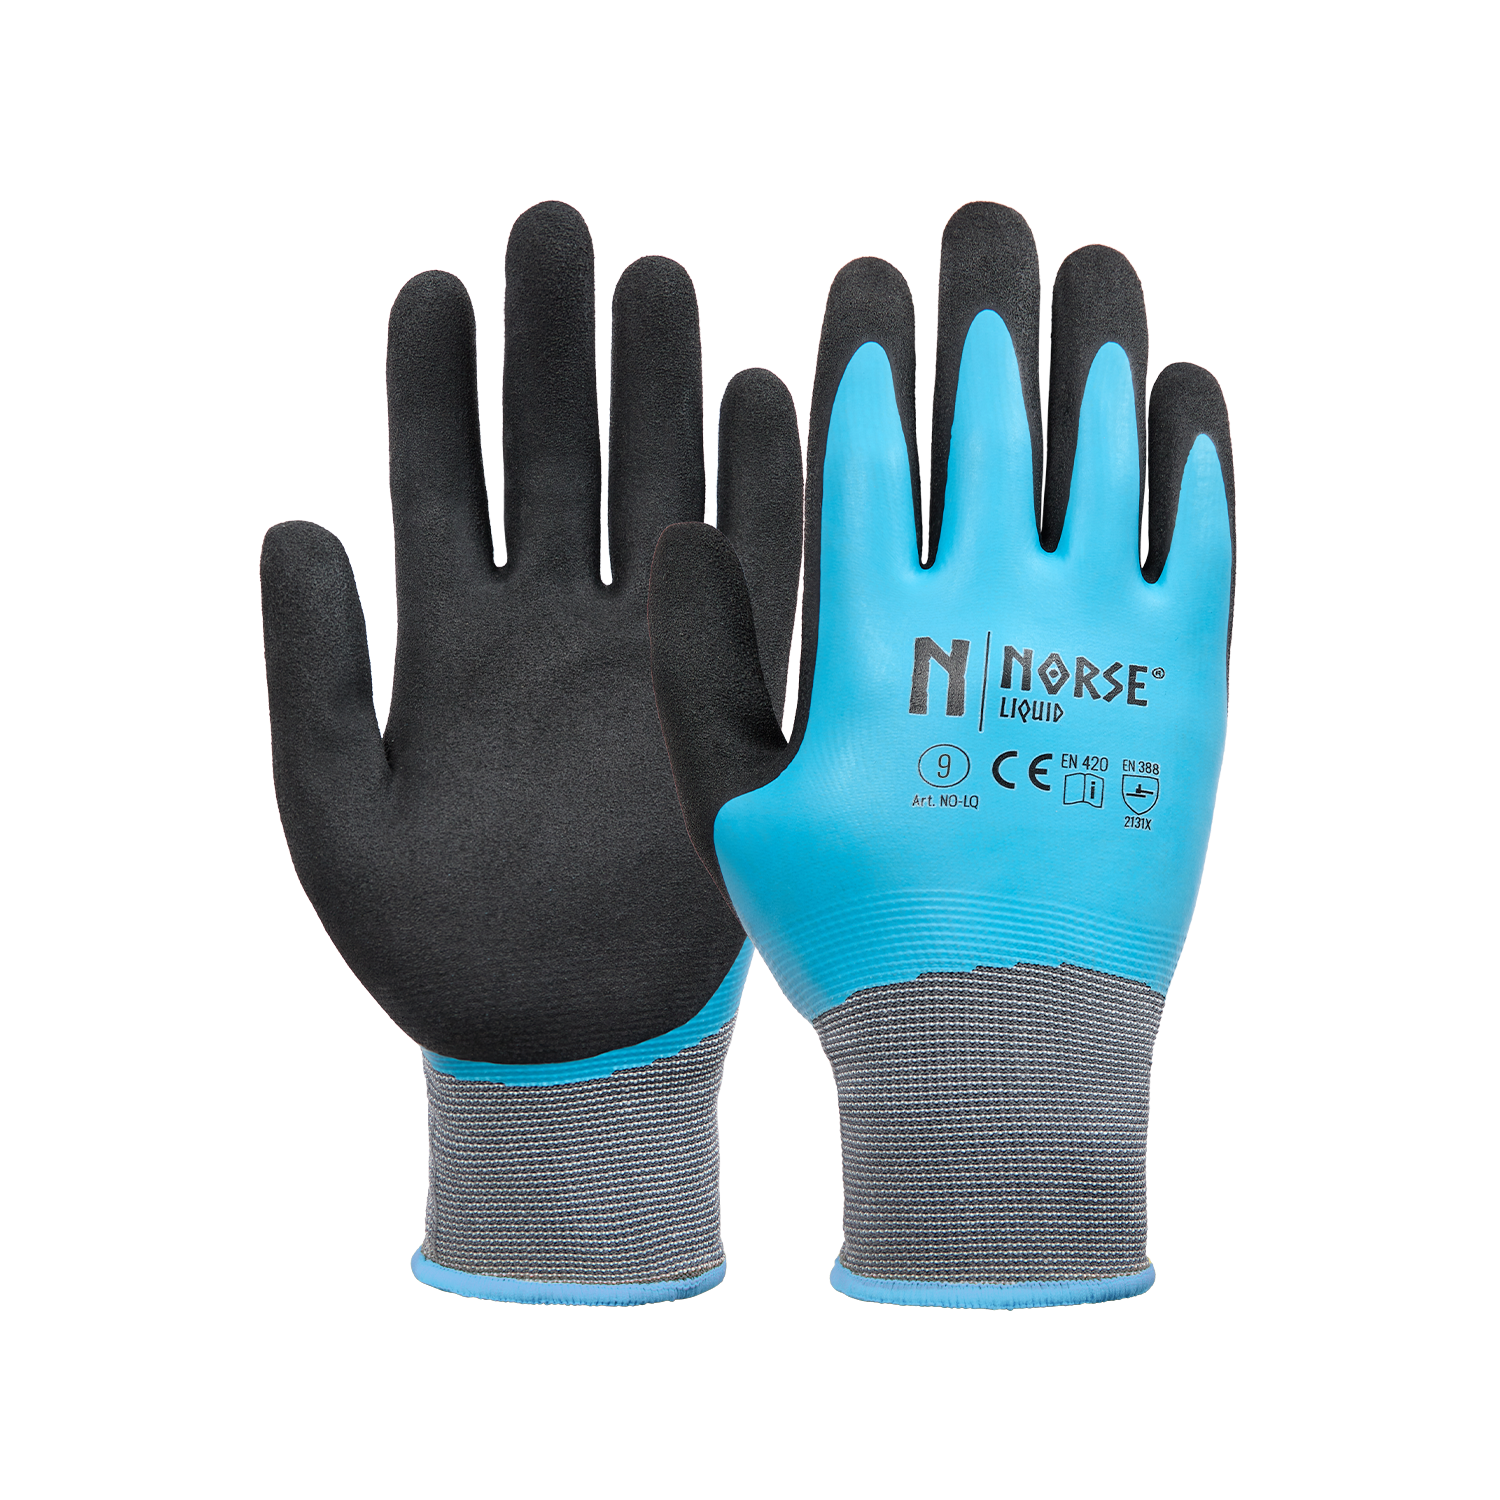 NORSE Liquid Waterproof assembly gloves size 8